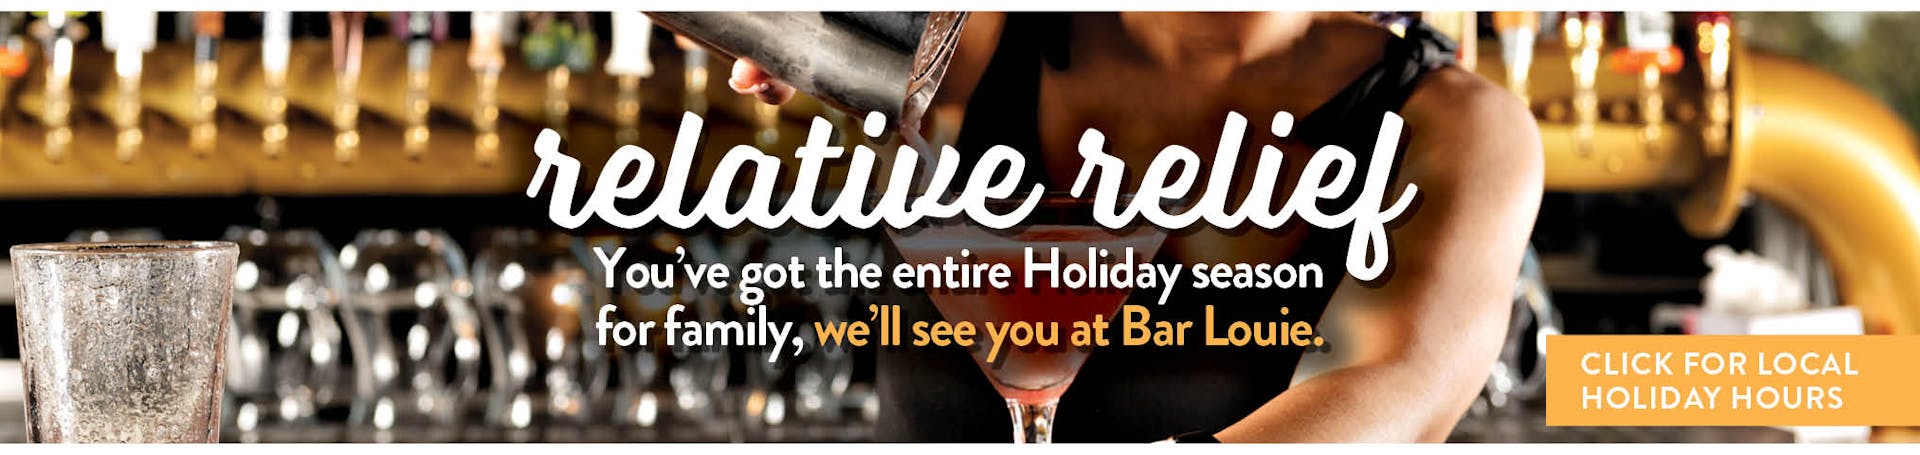 Image of bartender pouring a drink. Relative Relief. You've got the entire Holiday Season for family, we'll see you at Bar Louie. Click here for Holiday Hours.